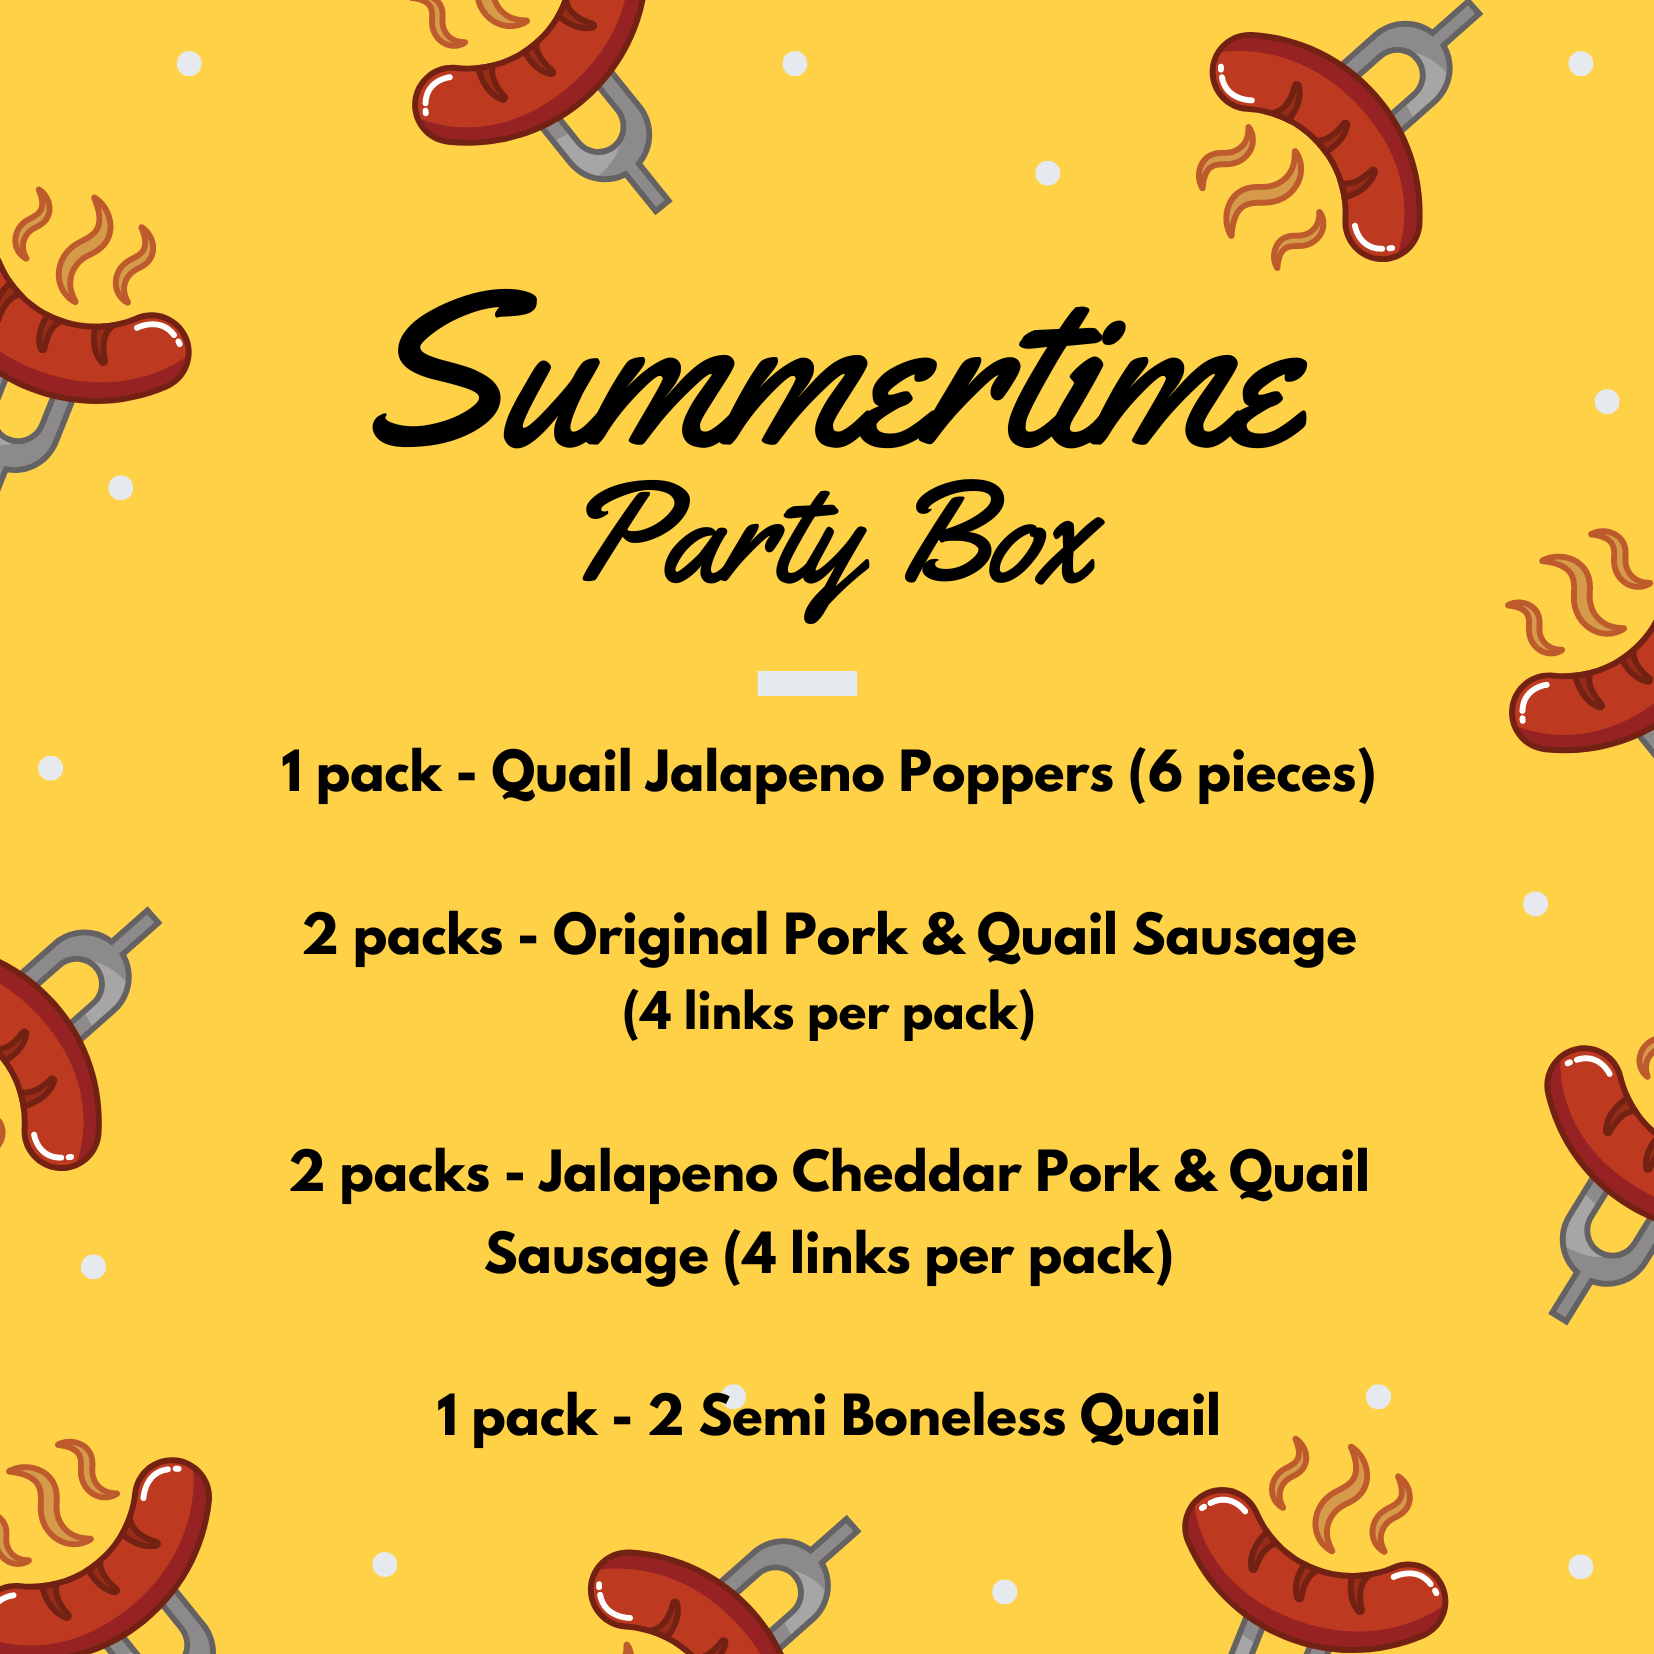 Summertime Party Box